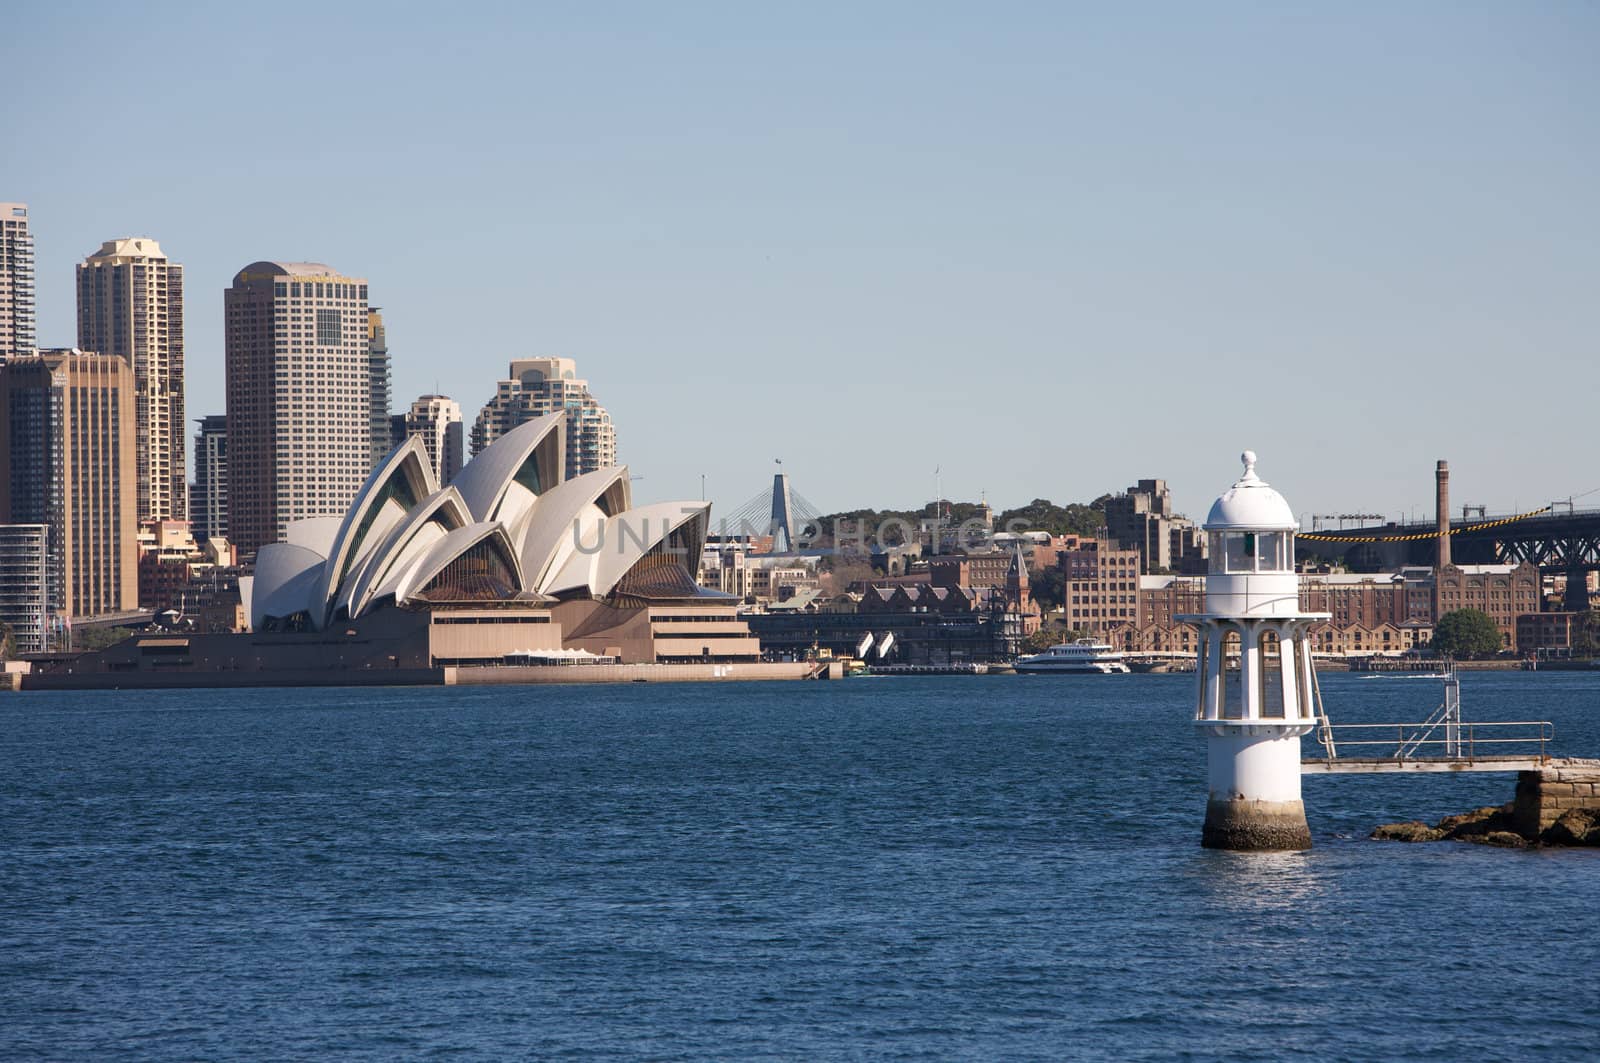 Sydney Opera House in Australia with the city center in the background and a ferry port